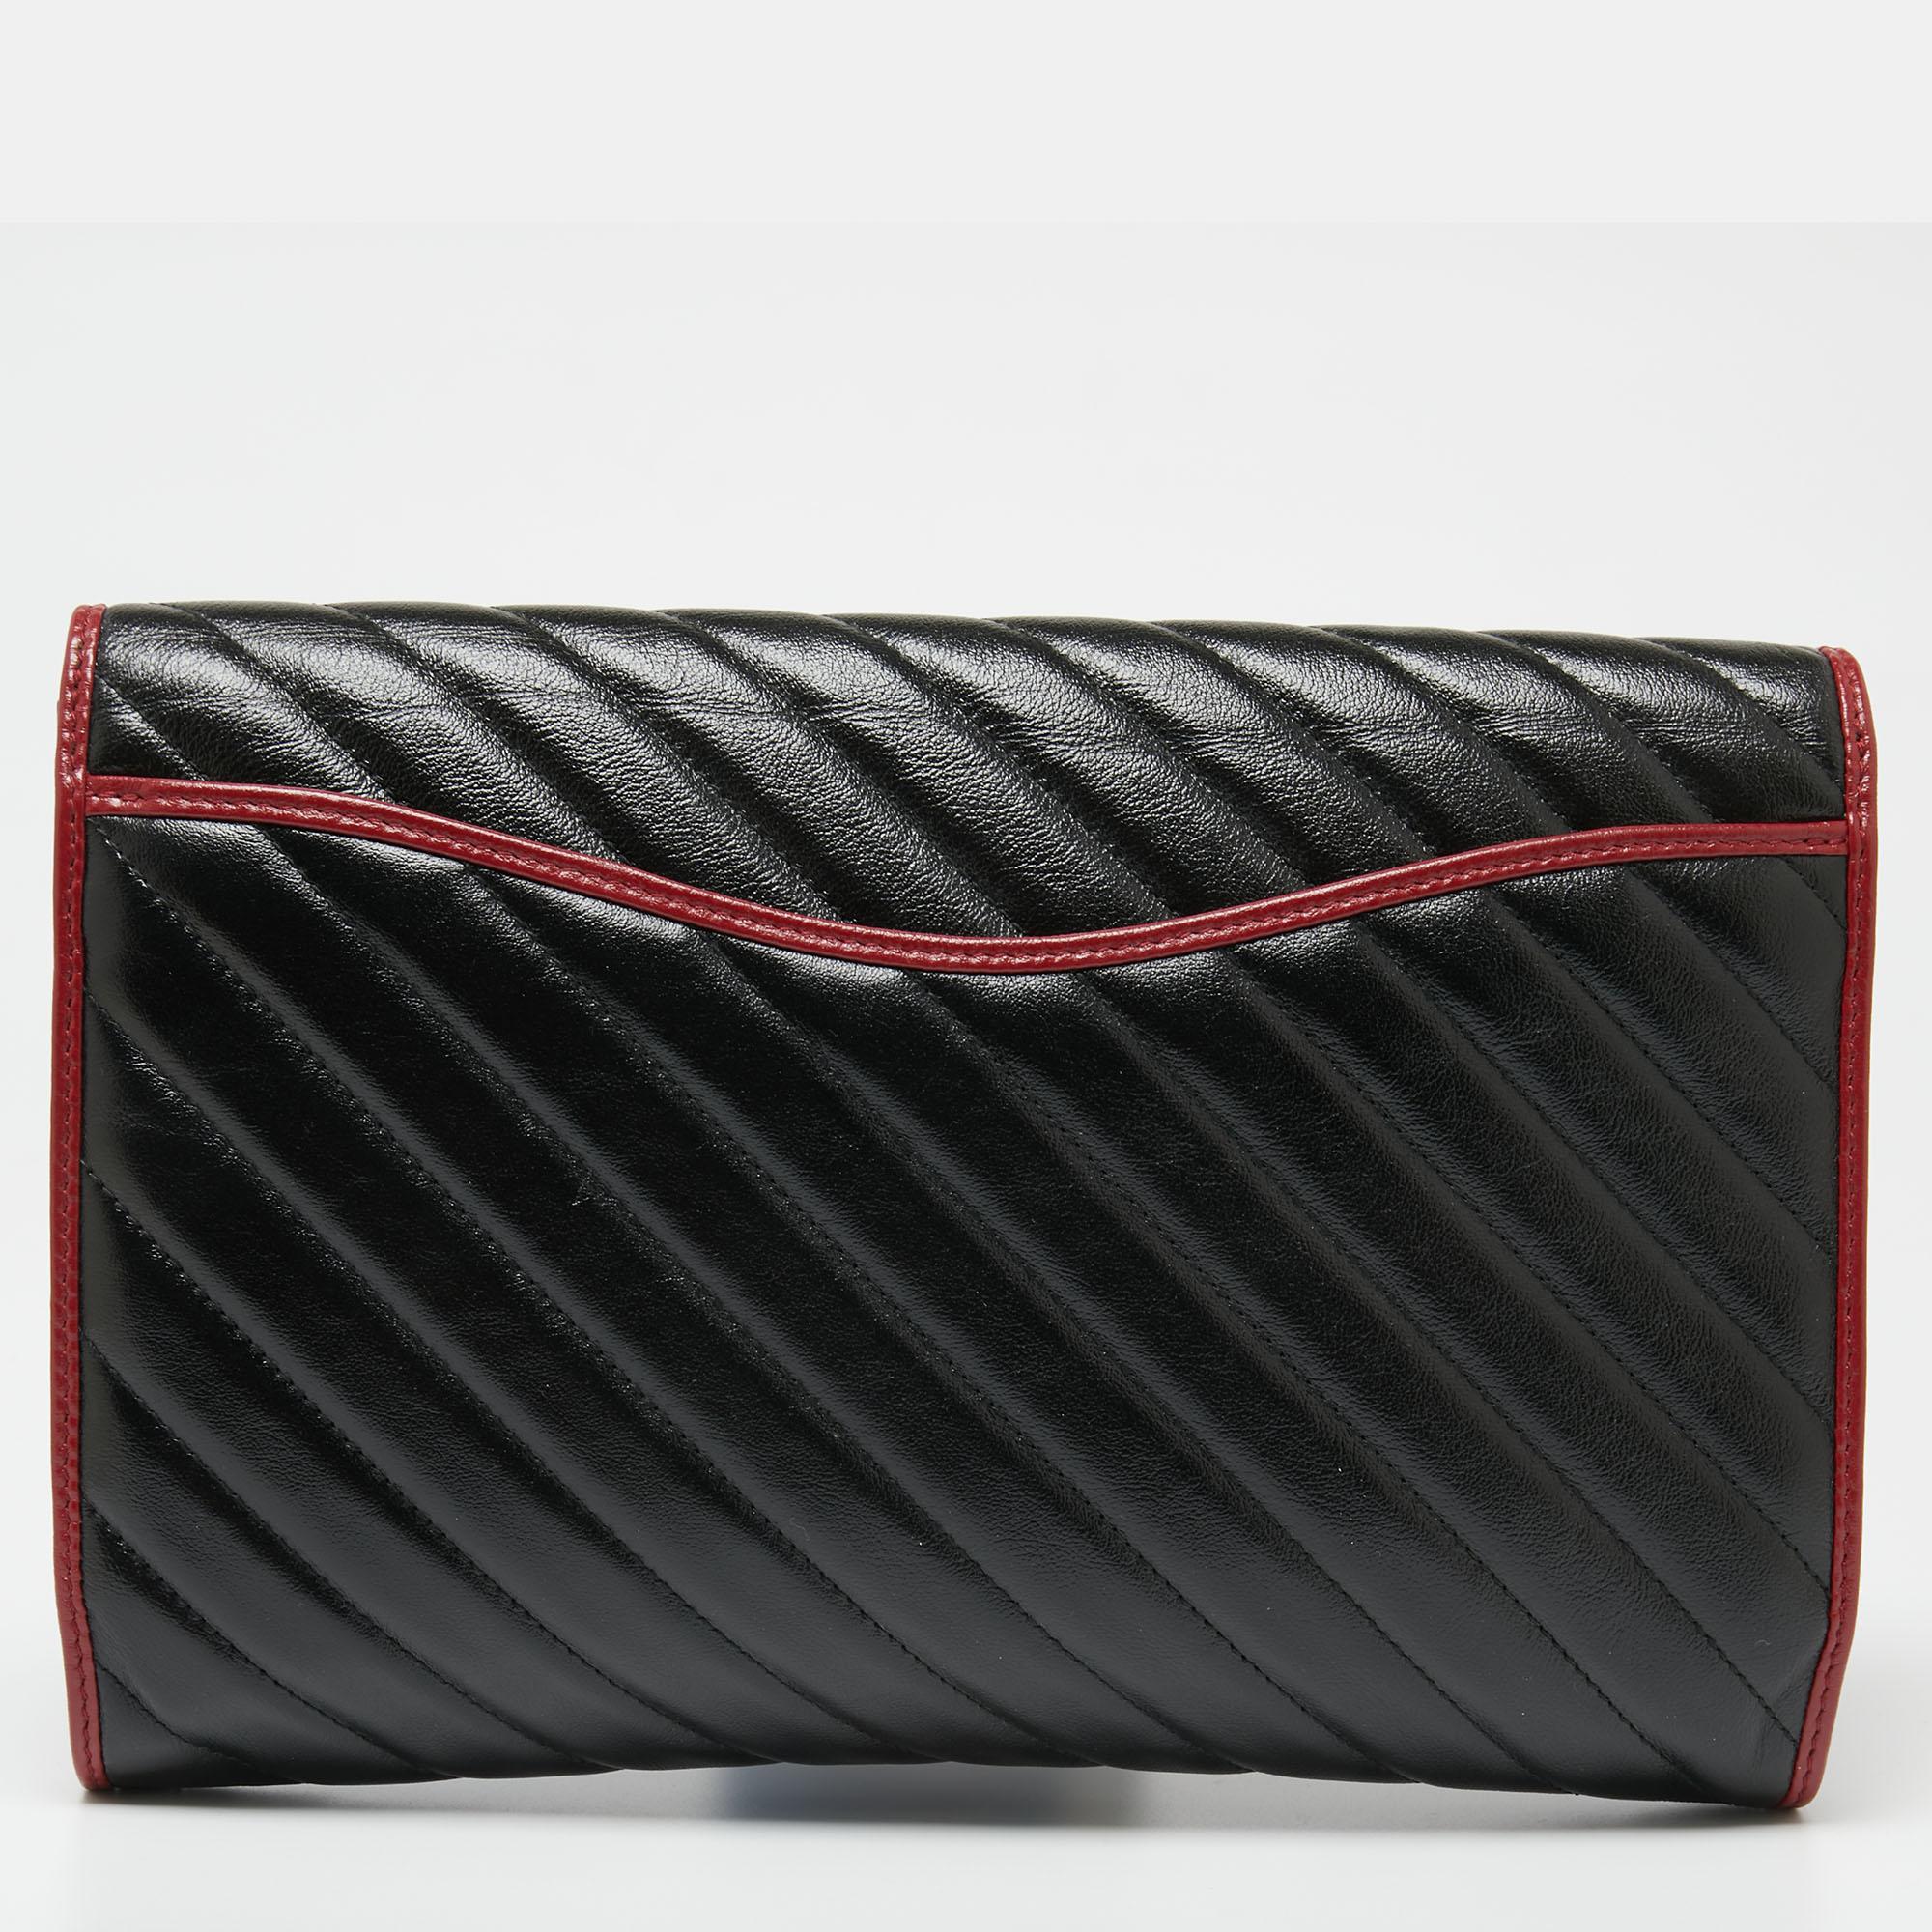 This black clutch has been exquisitely crafted from diagonal-quilted leather and is equipped with a well-sized suede interior. On the front flap, there is a gold-tone GG logo. Make this Gucci creation yours today!

Includes: Original Dustbag, Info